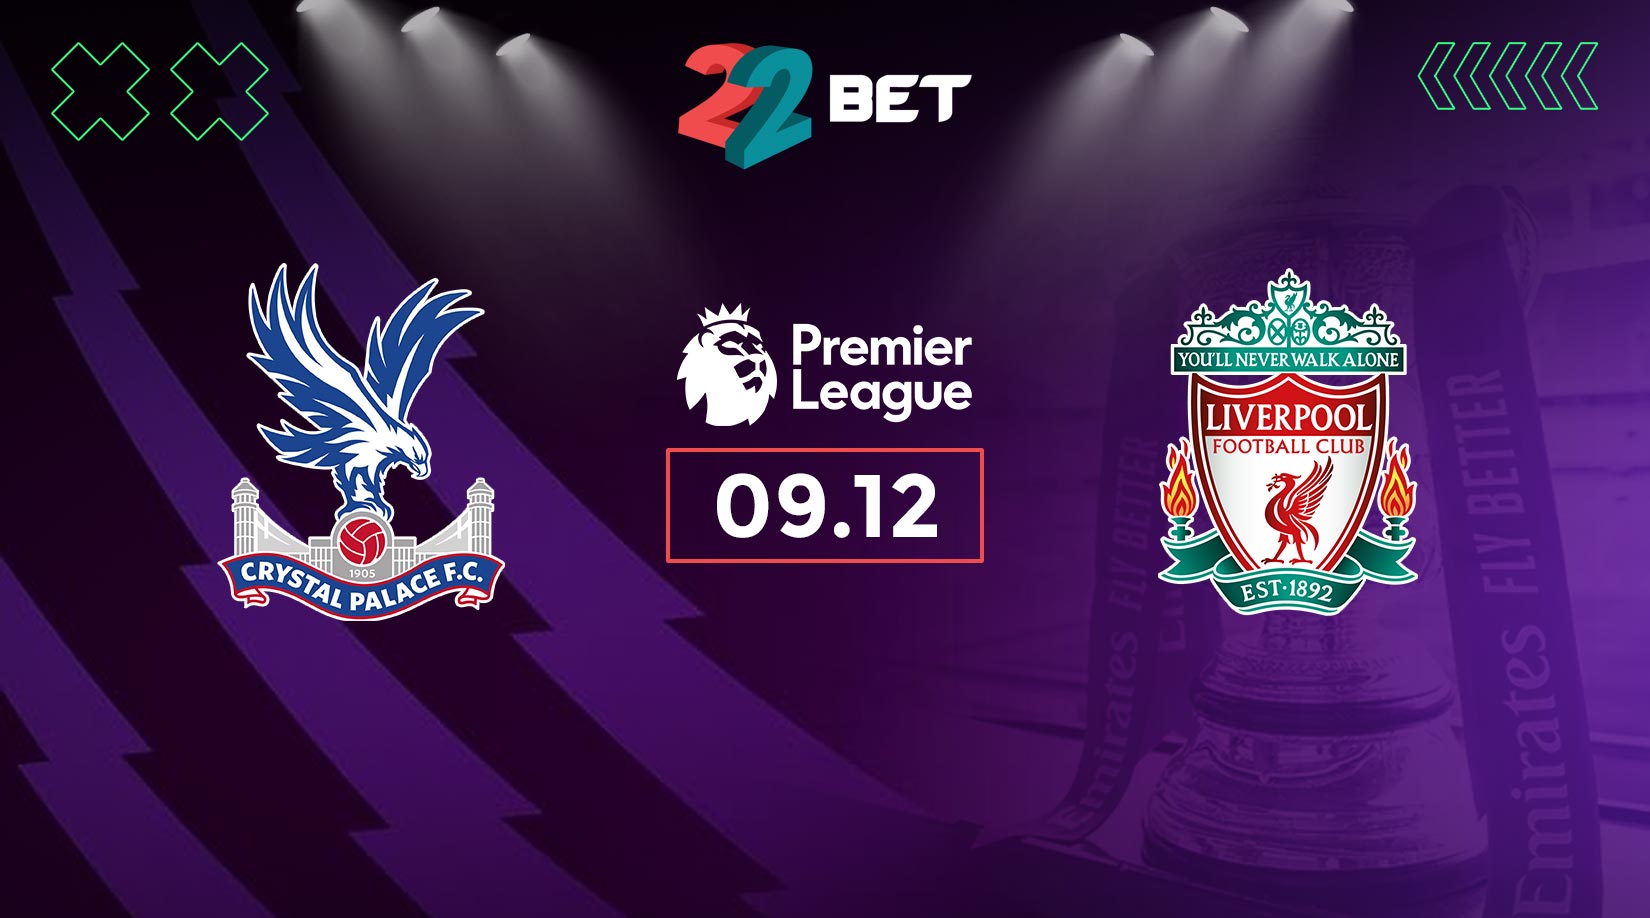 Crystal Palace vs Liverpool Prediction: Premier League Match on 09.12.2023